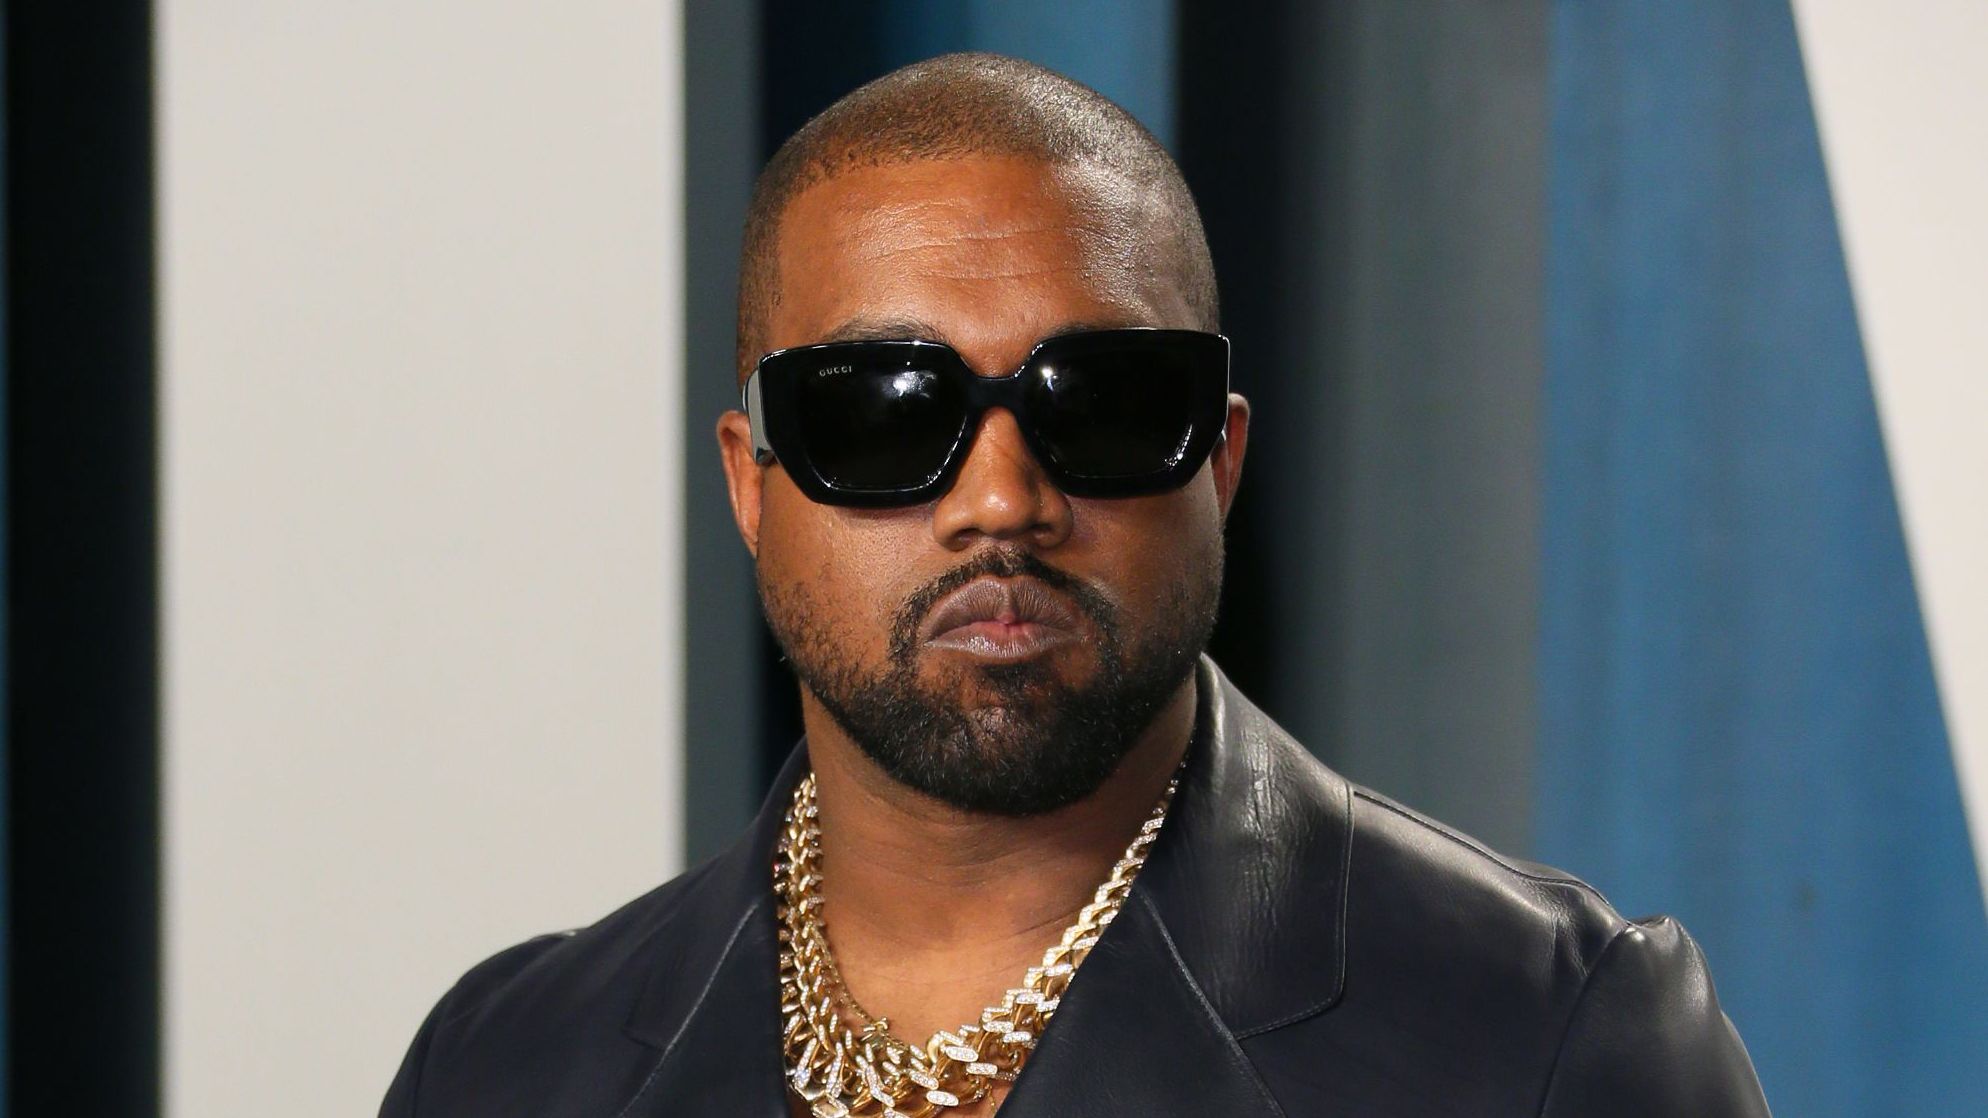 Kanye West Net Worth, Age, Height, Parents And More